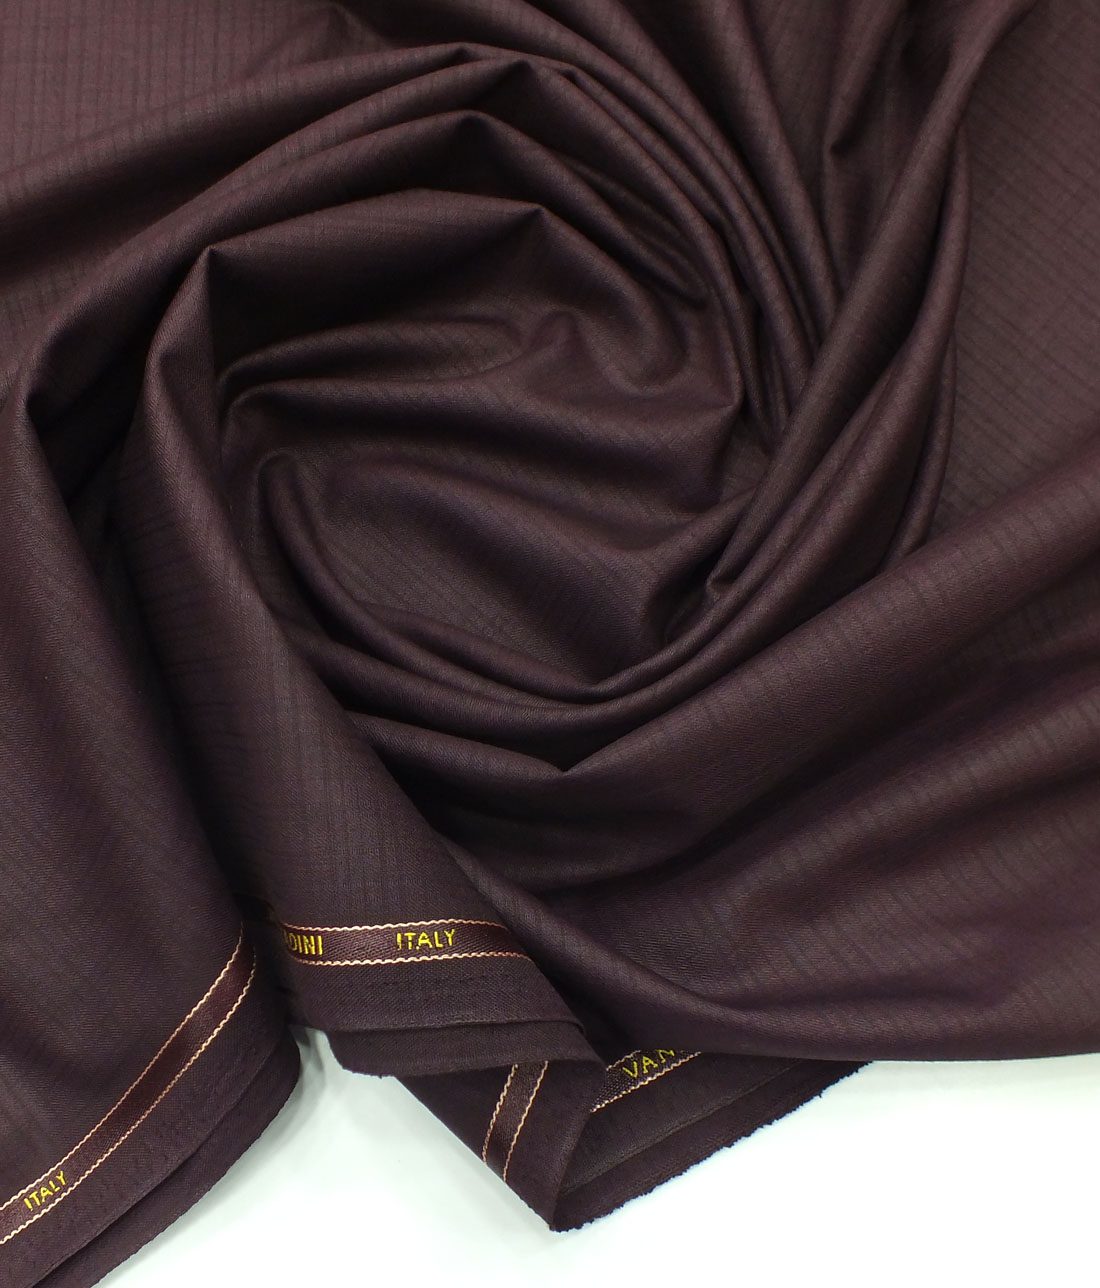 Cadini Italy by Siyaram's Dark Plum Purple Self Design Terry Rayon Trouser or 3 Piece Suit Fabric (Unstitched - 1.25 Mtr)